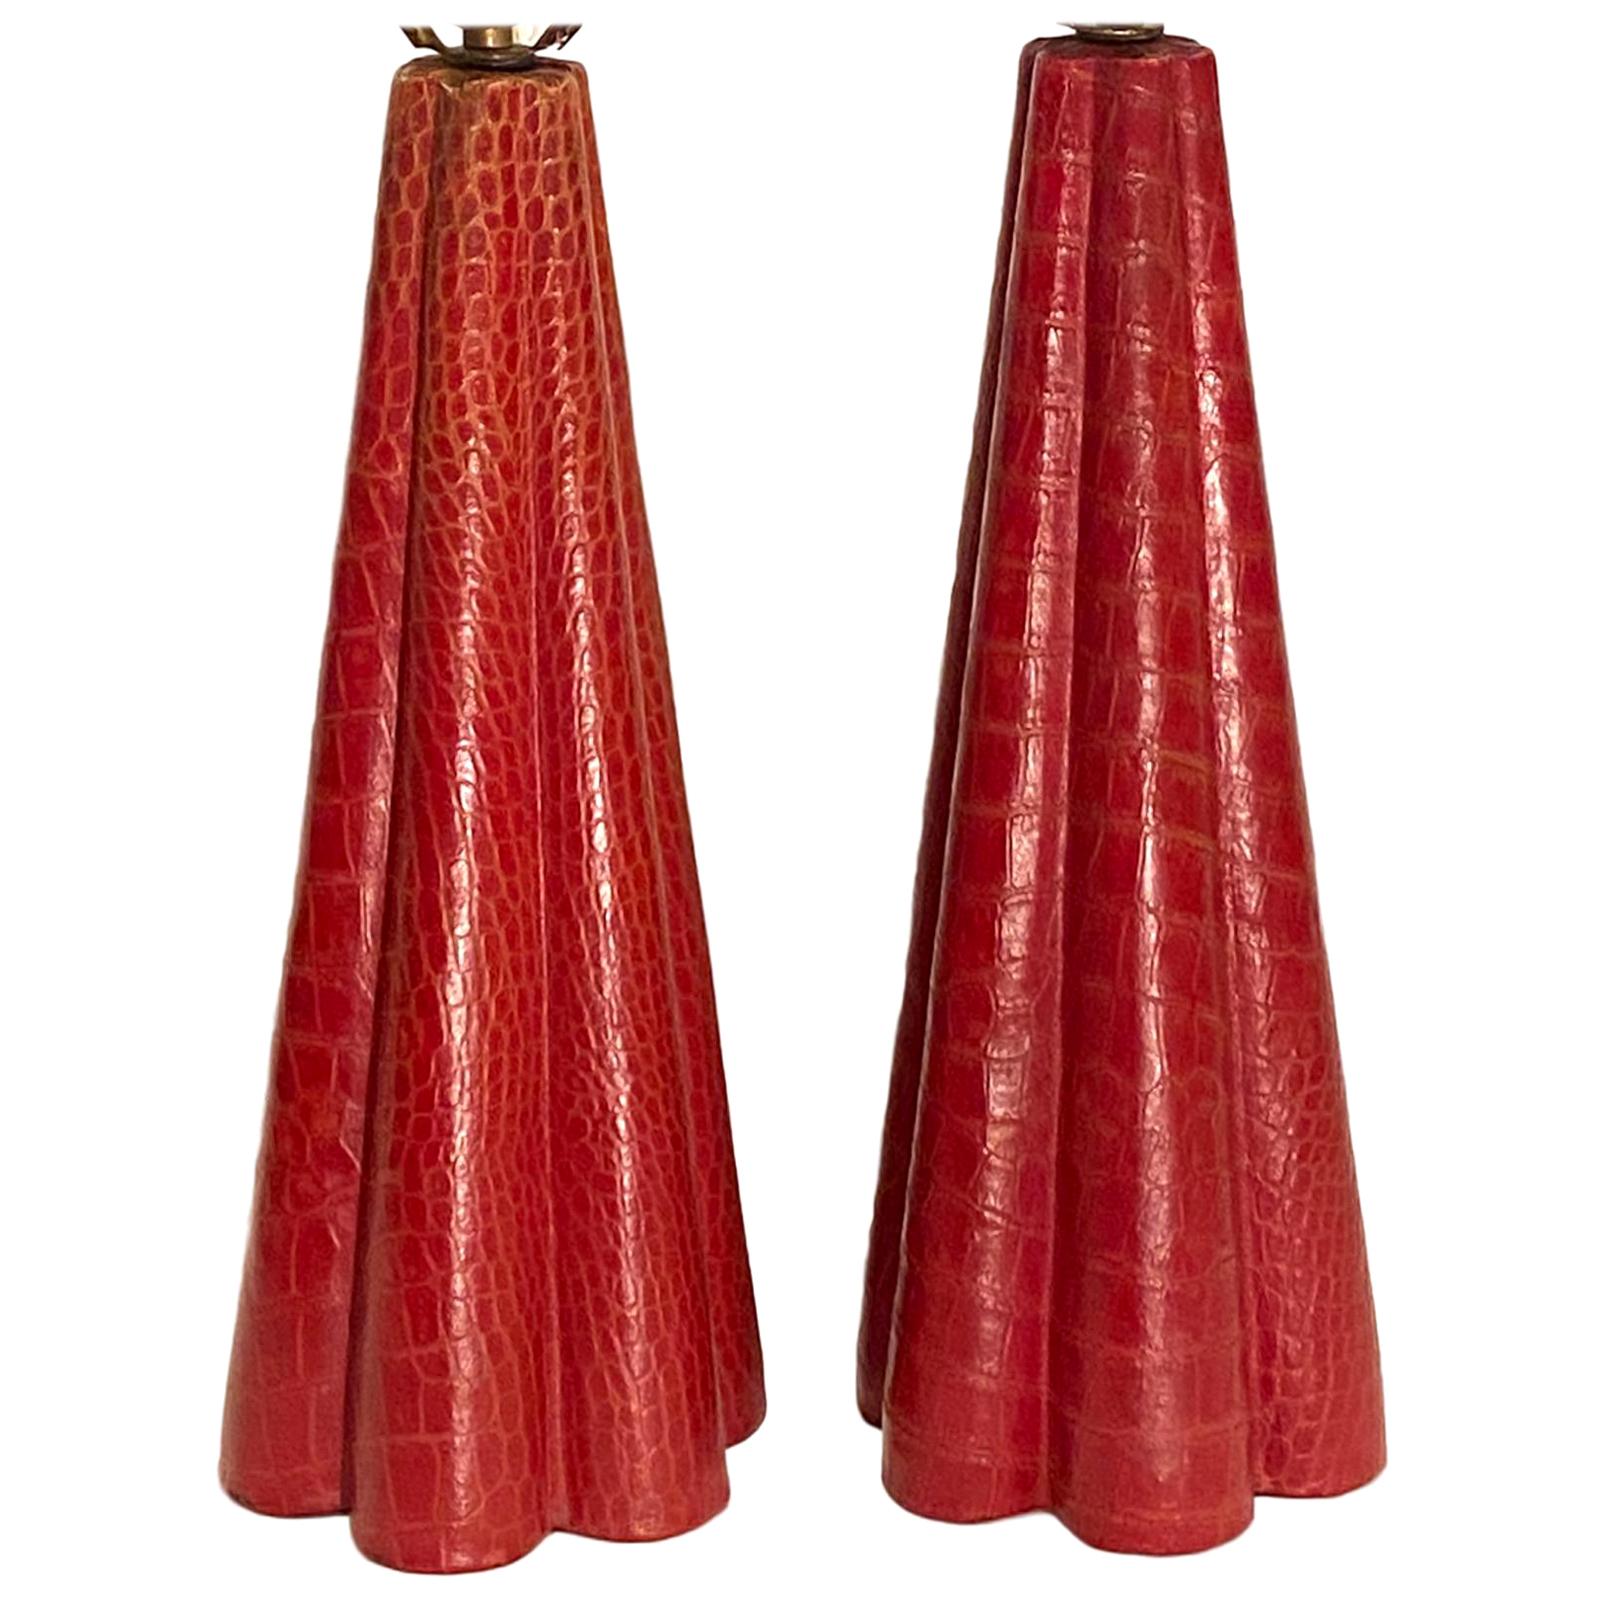 Midcentury Red Leather Table Lamps